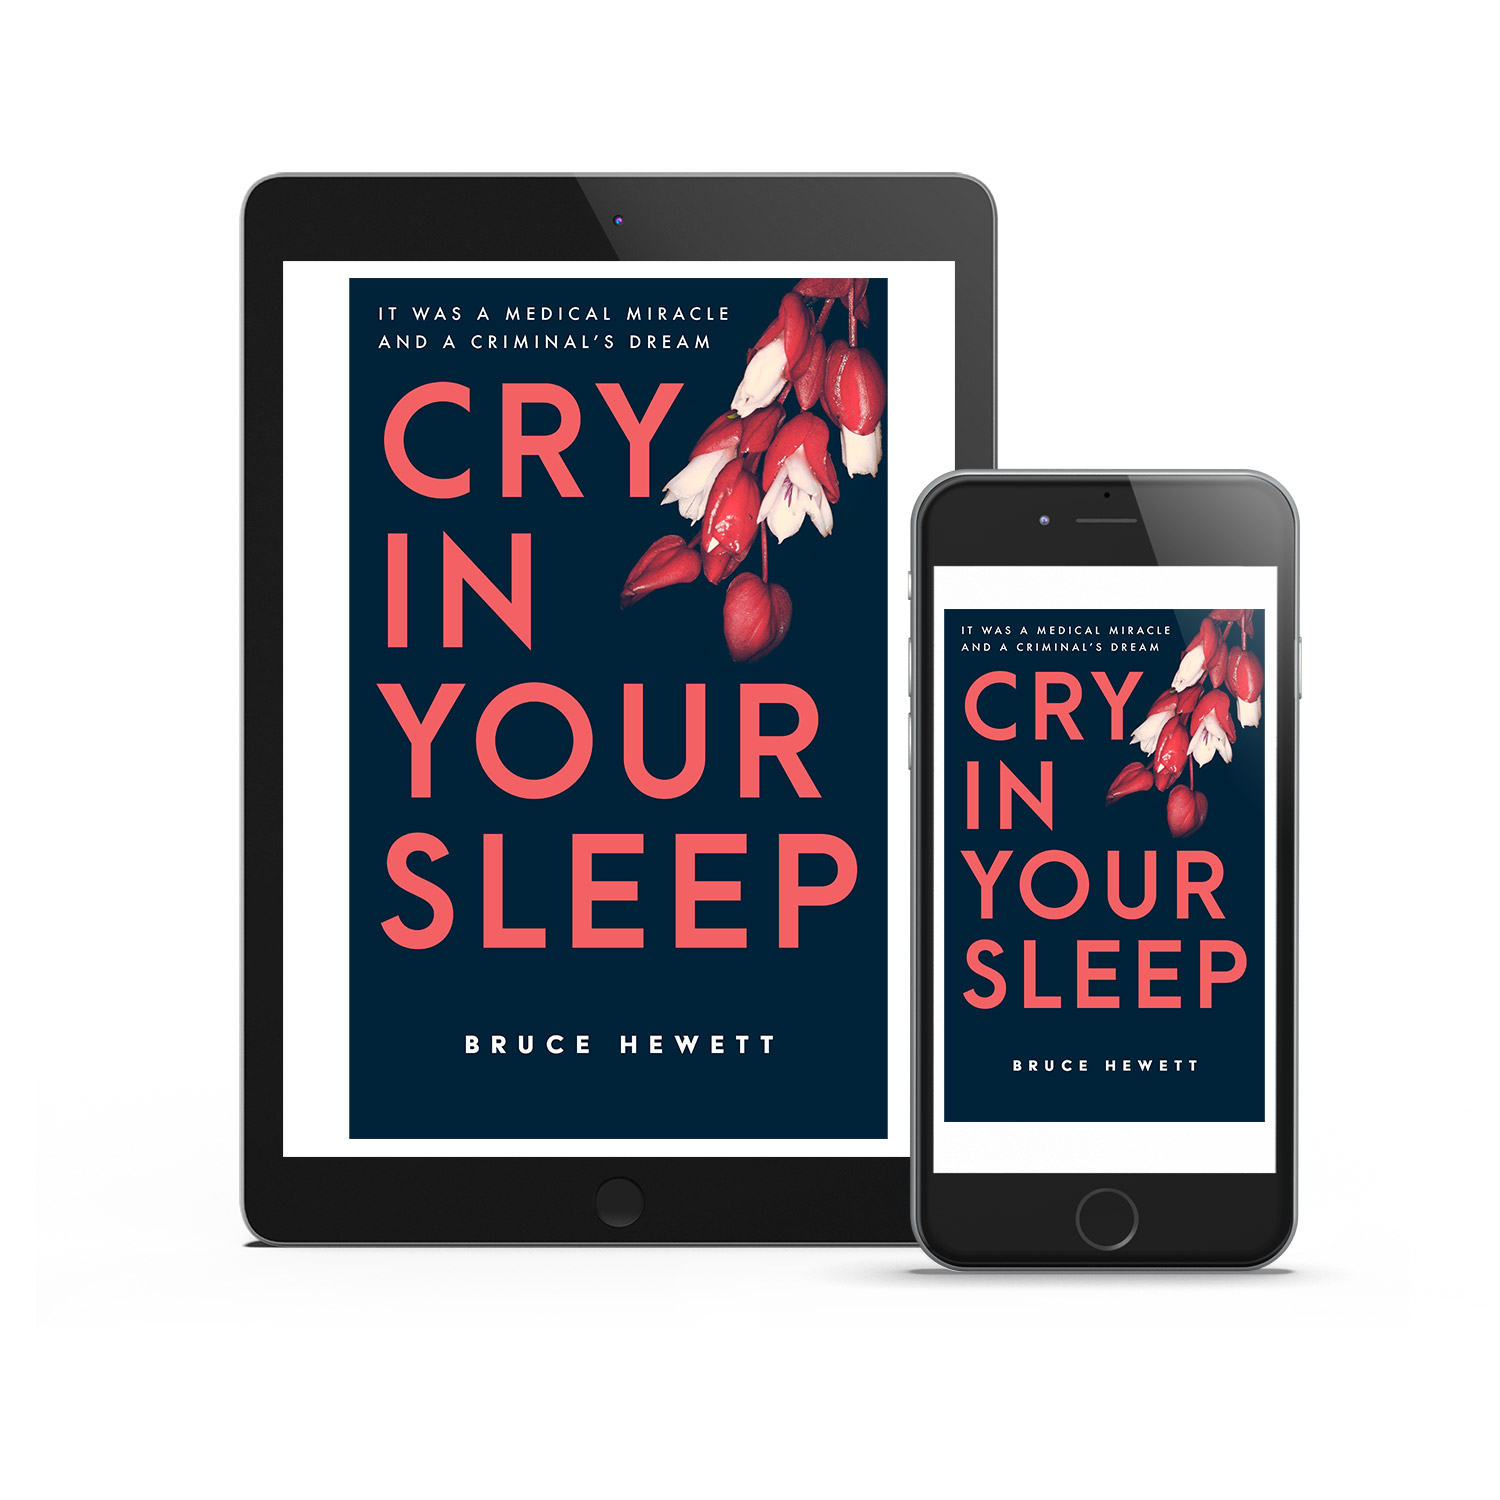 'Cry In Your Sleep' is cracking modern pharma crime thriller. The author is Bruce Hewett. The book cover design and interior formatting are by Mark Thomas. To learn more about what Mark could do for your book, please visit coverness.com